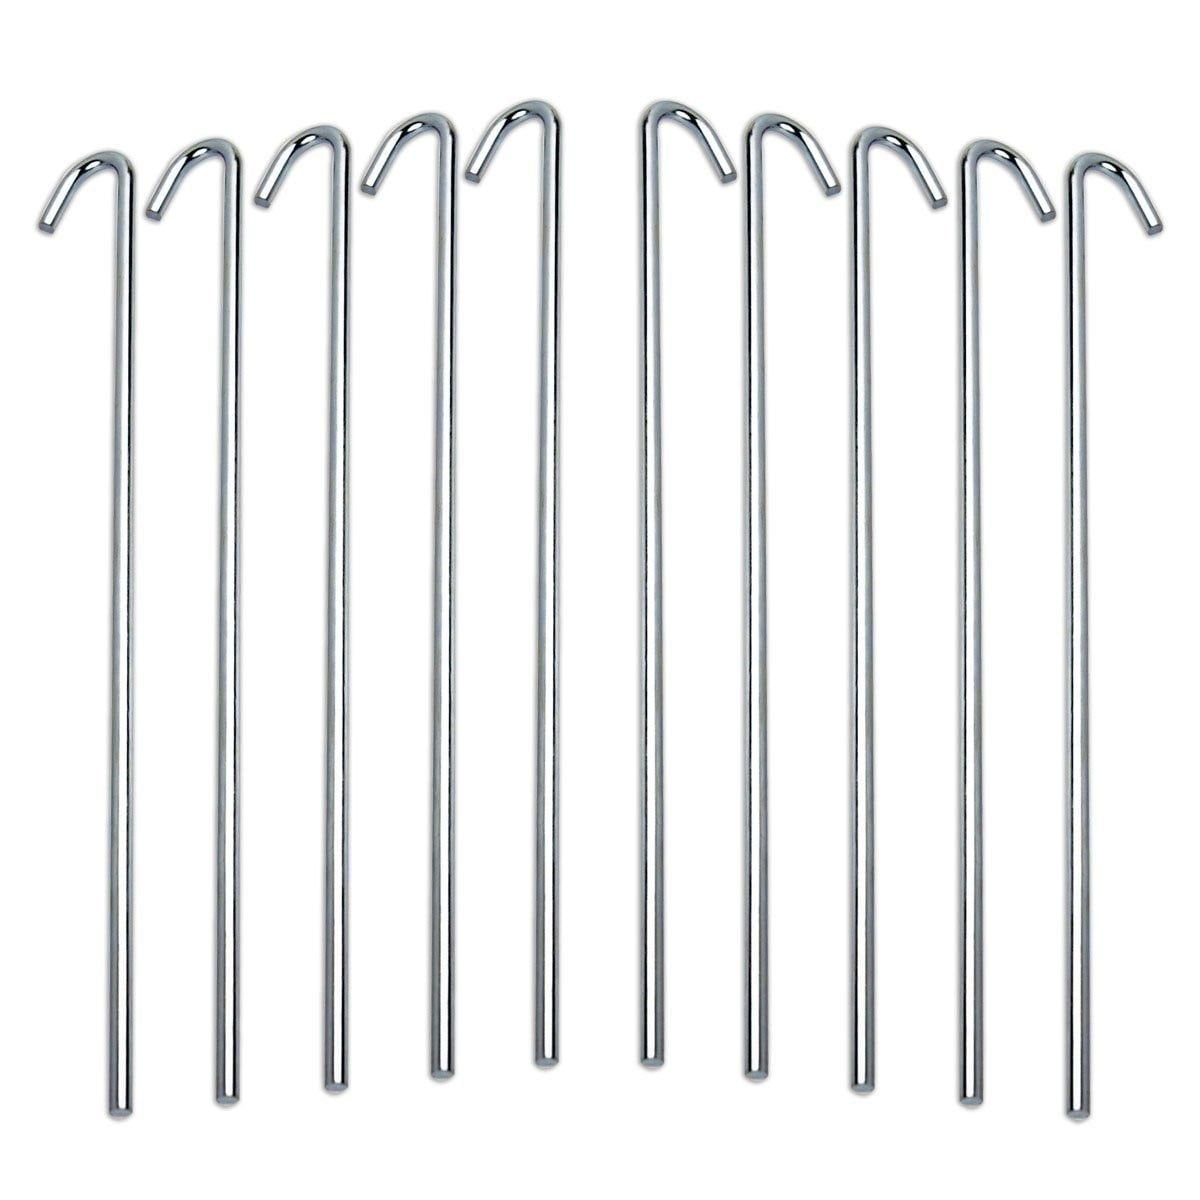 Details about   Sturdy Garden Stakes  4 Ft FREE SHIP Steel Plant Stakes Pack of 10 